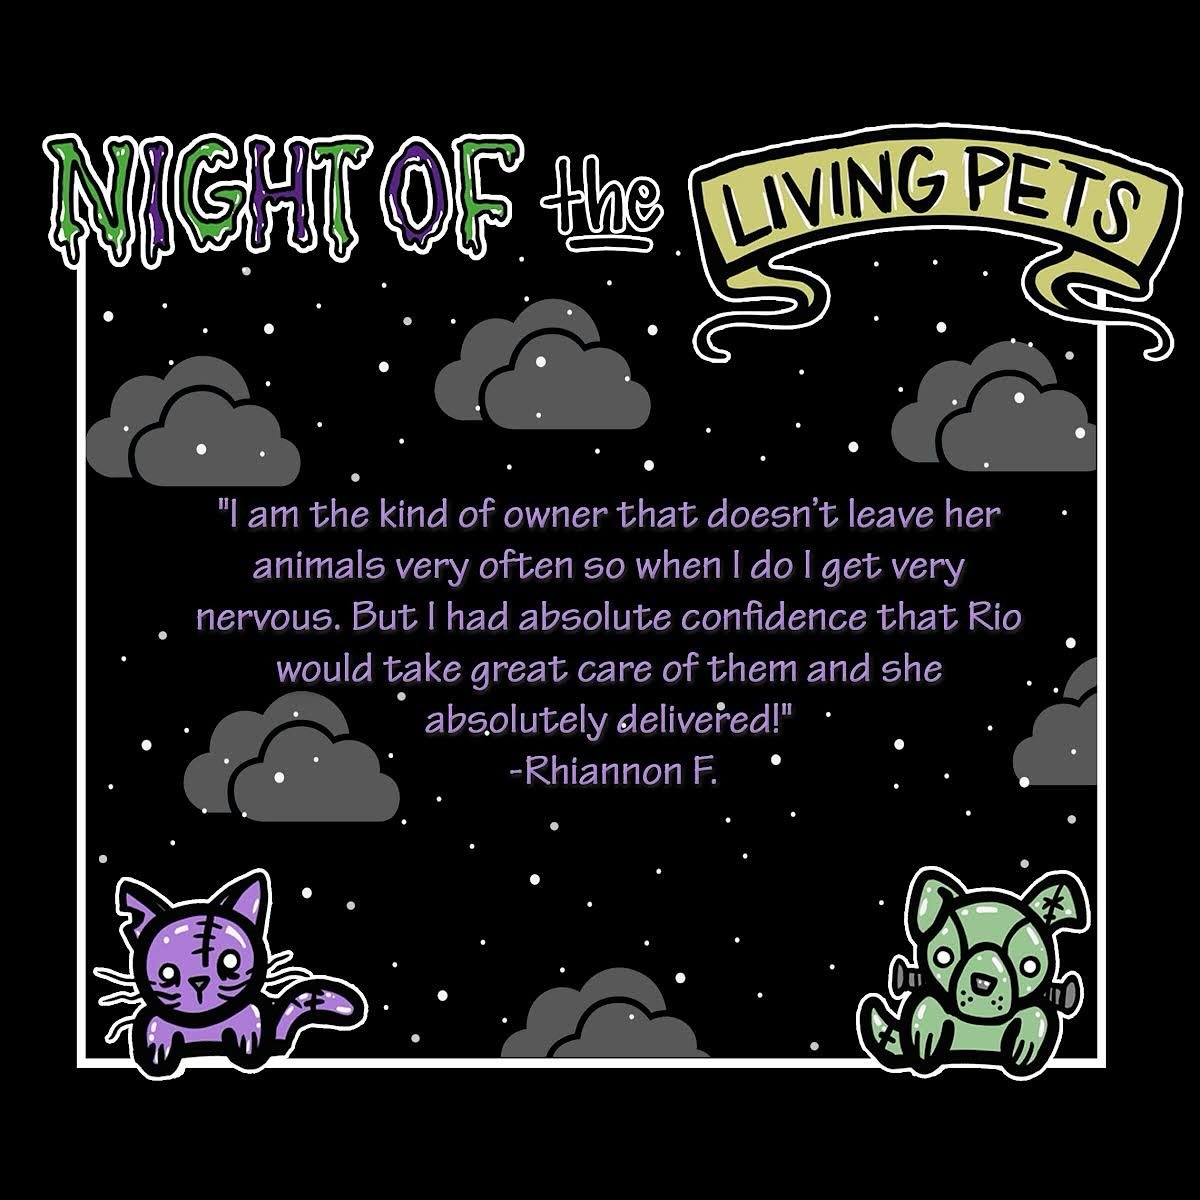 &ldquo;I am so thankful for Night of the Living Pets! I am the kind of owner that doesn&rsquo;t leave her animals very often so when I do I get very nervous. But I had absolute confidence that Rio would take great care of them and she absolutely deli